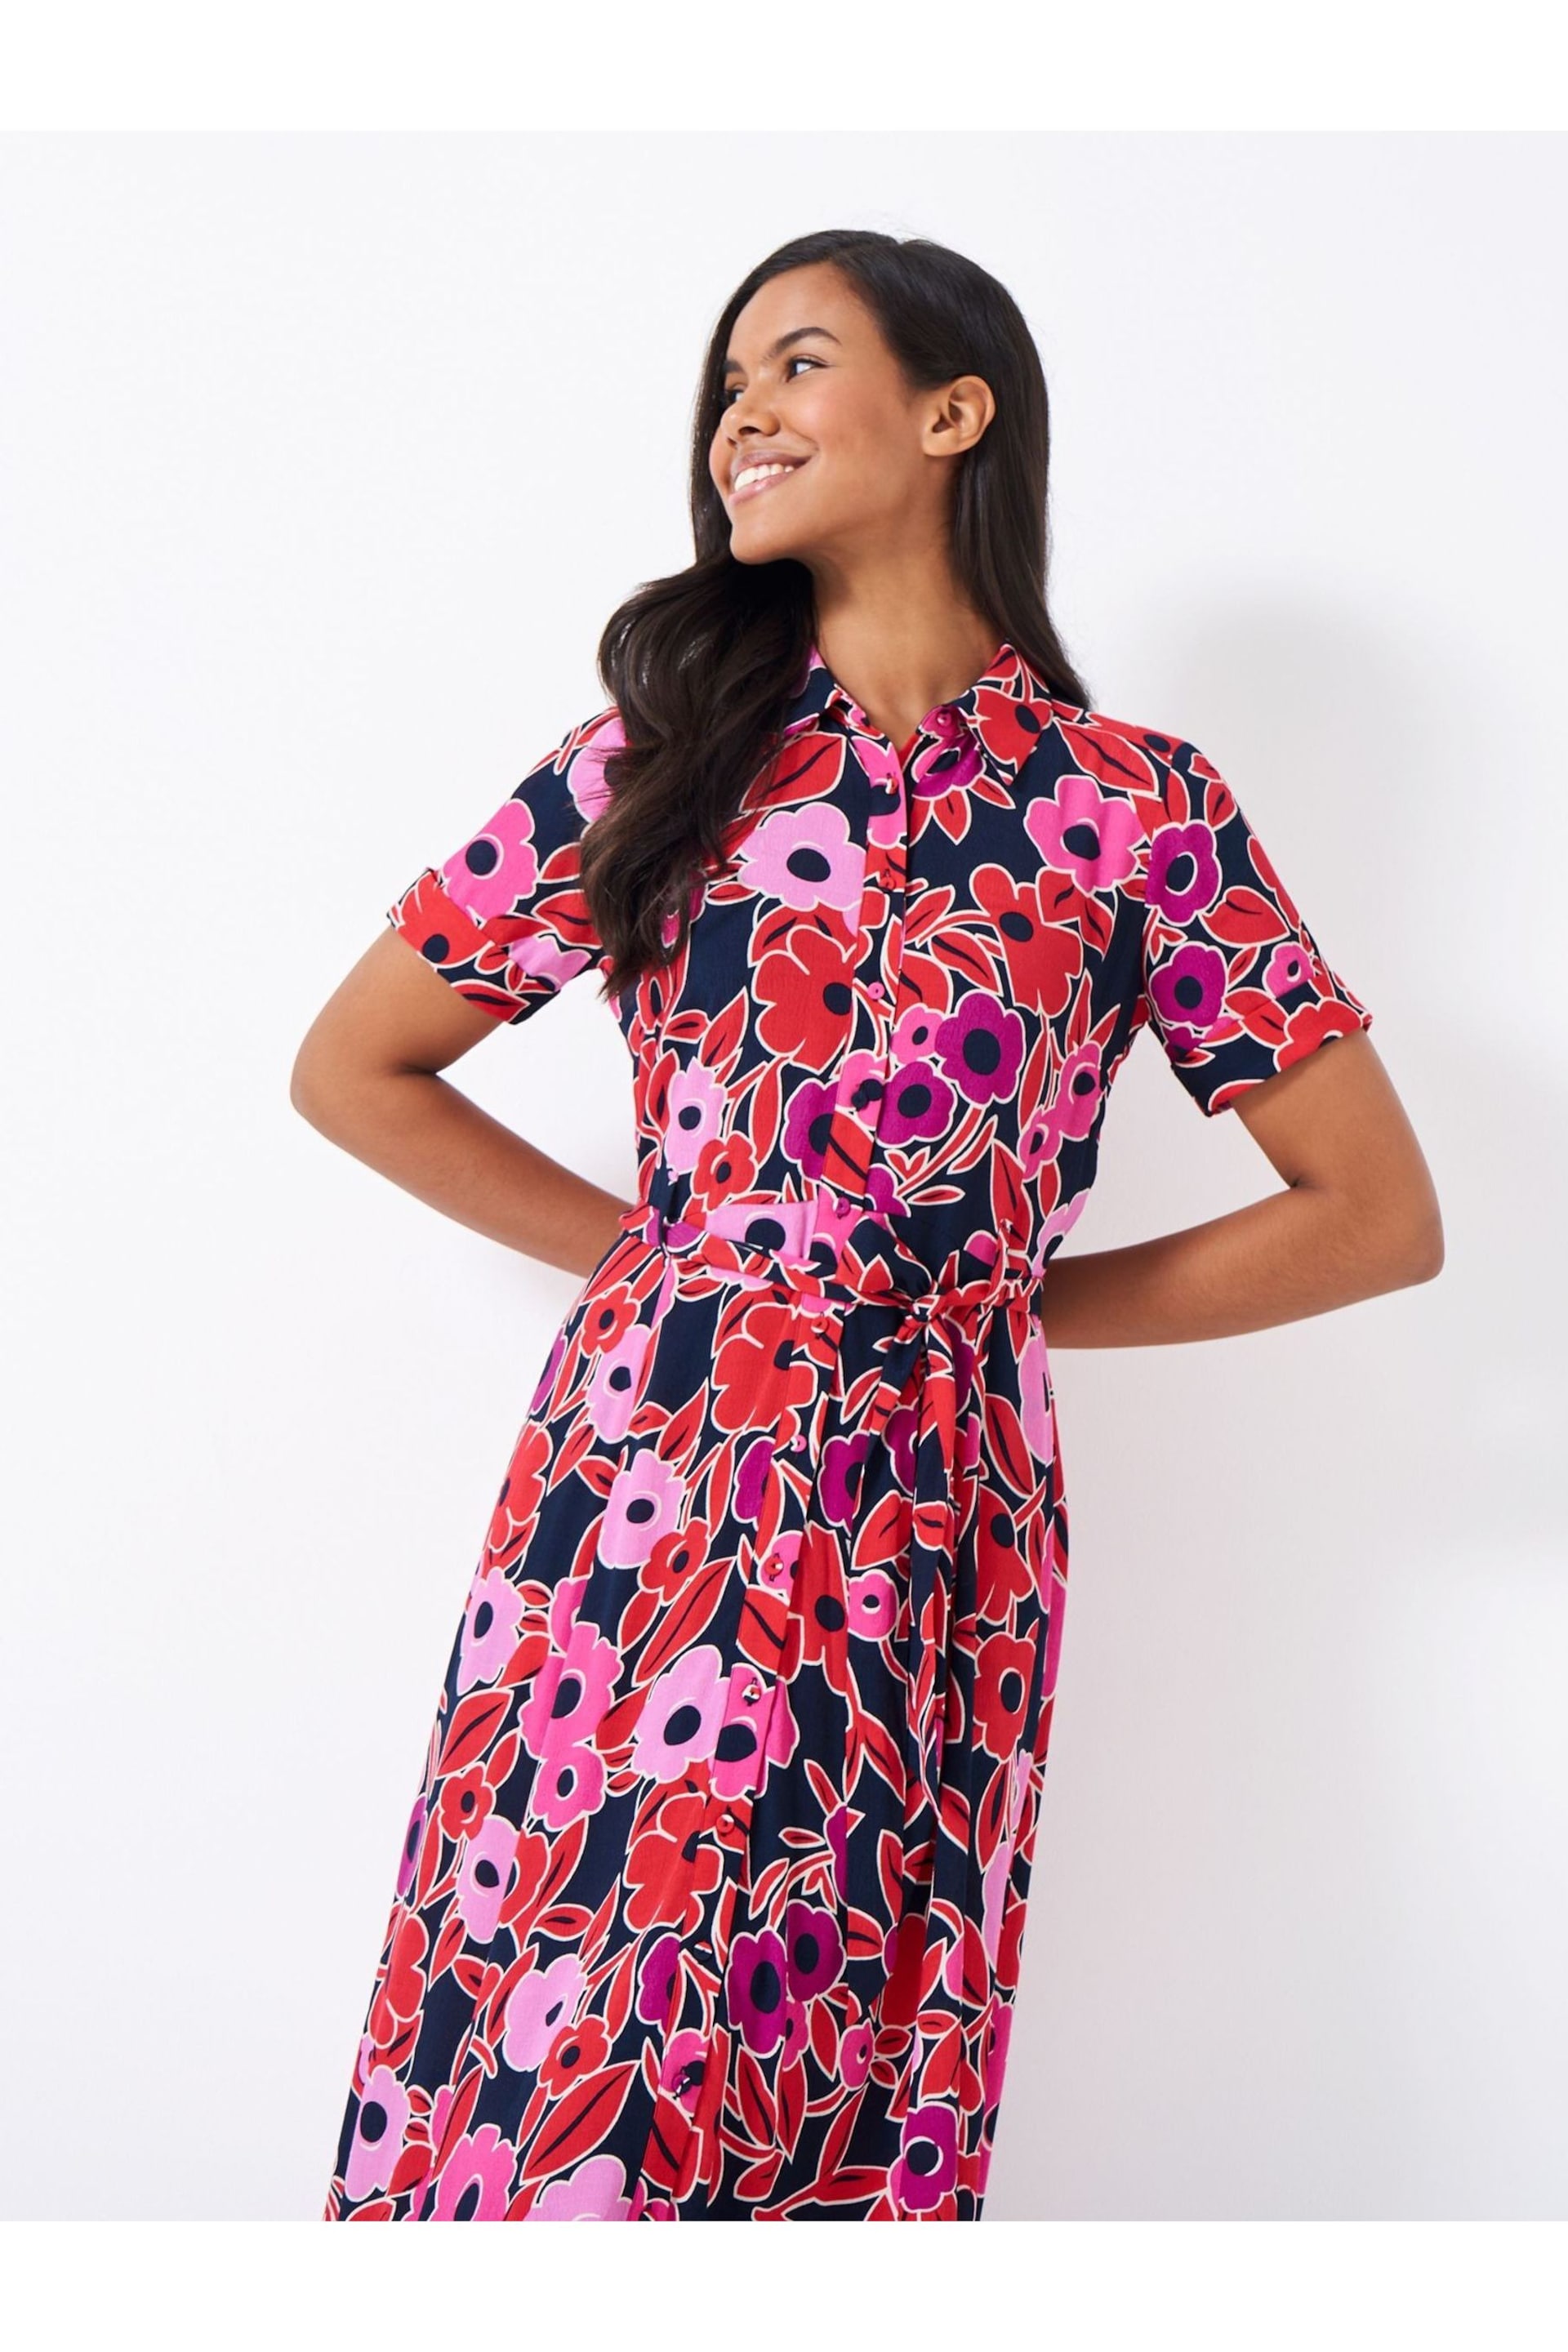 Crew Clothing Sienna Short Sleeve Floral Shirt Dress - Image 3 of 5